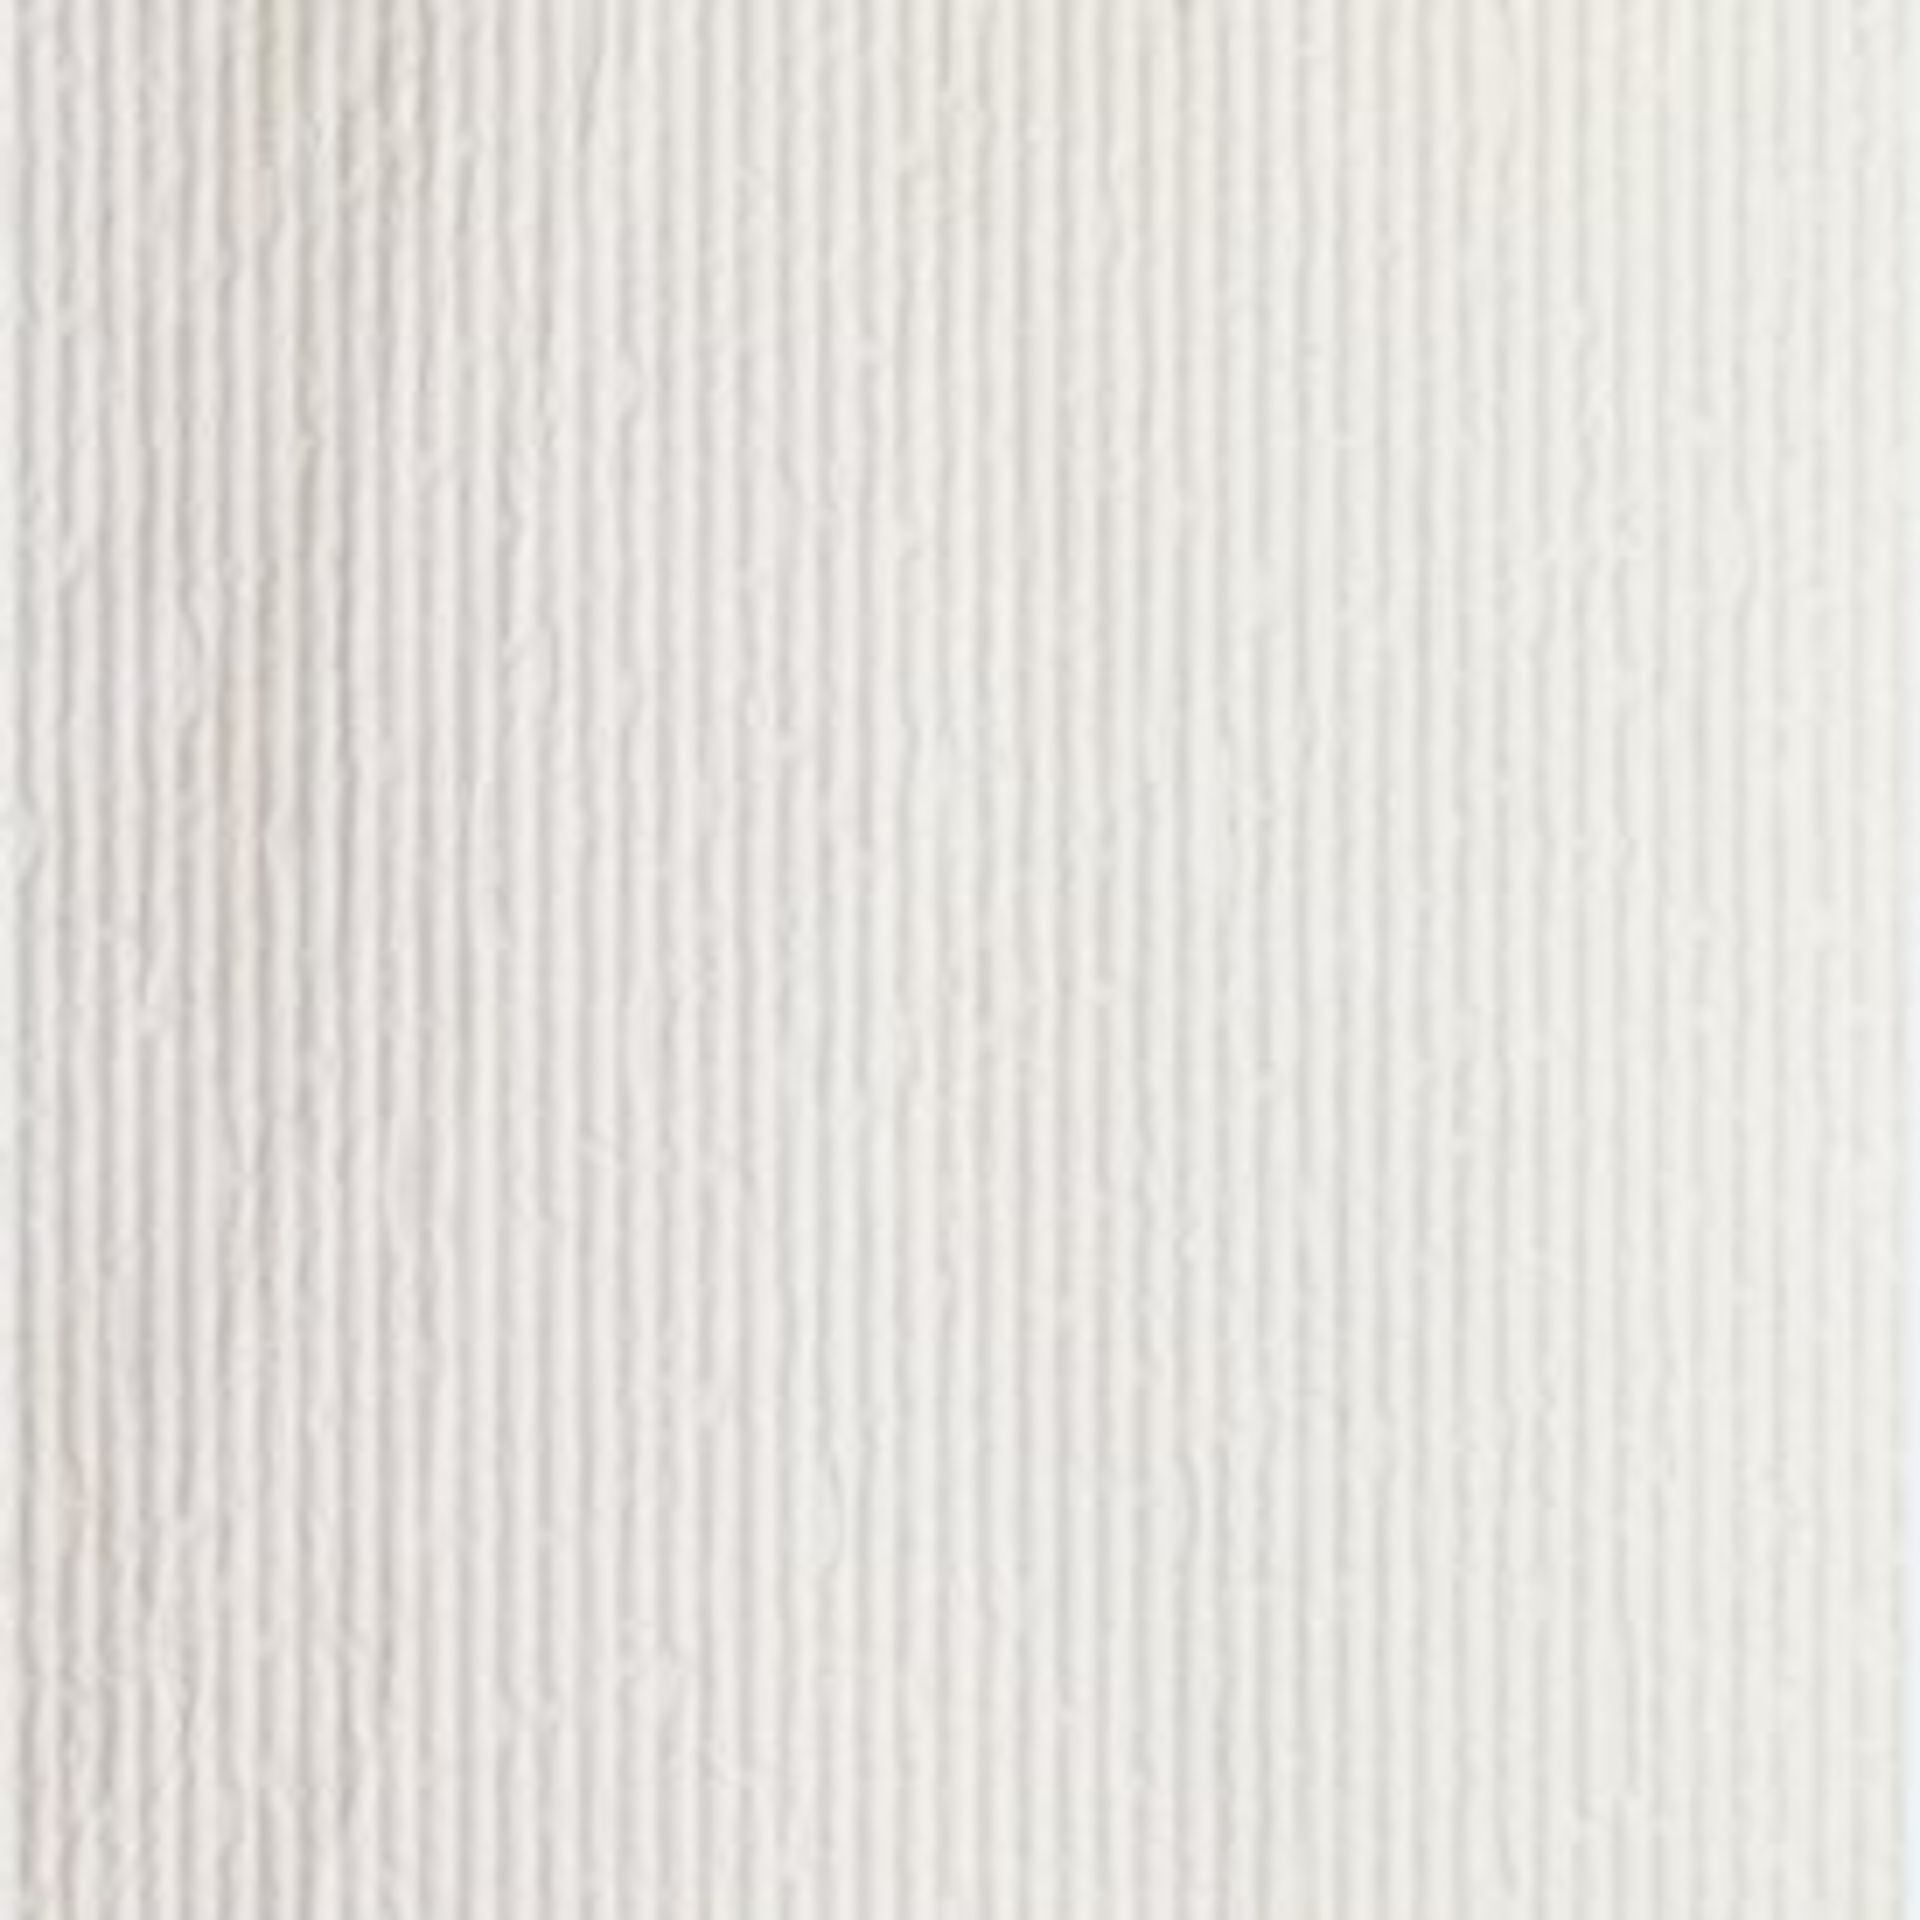 10x packs of 5 Johnsons 600x300mm Haven Sanmd decor textured wall and floor tiles , new, ref code